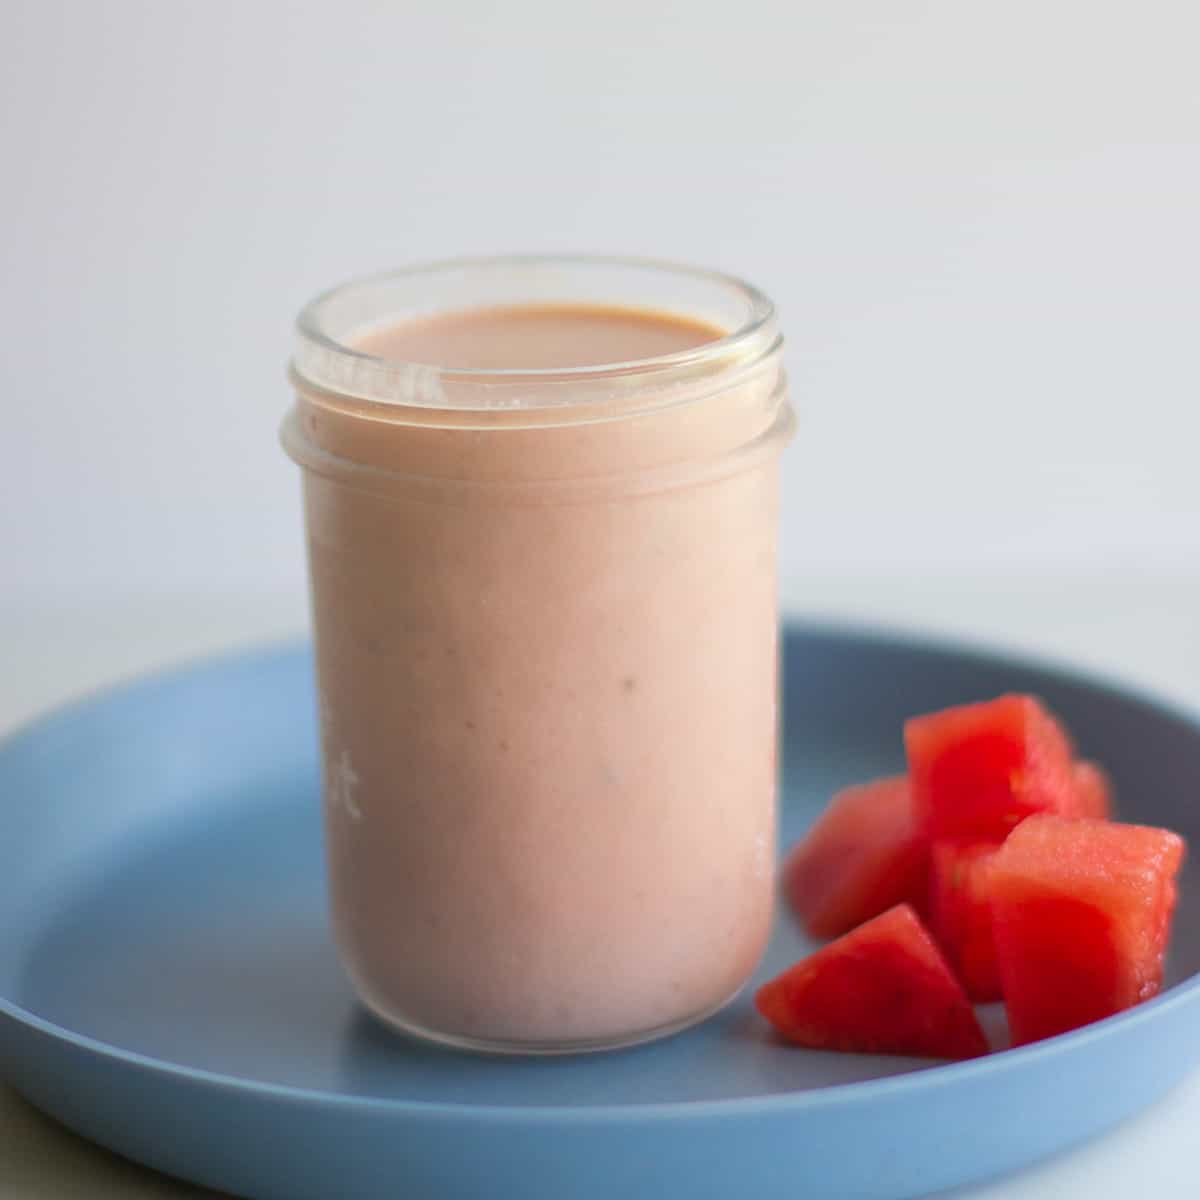 Smoothie in a glass jar with cubed watermelon on the side.